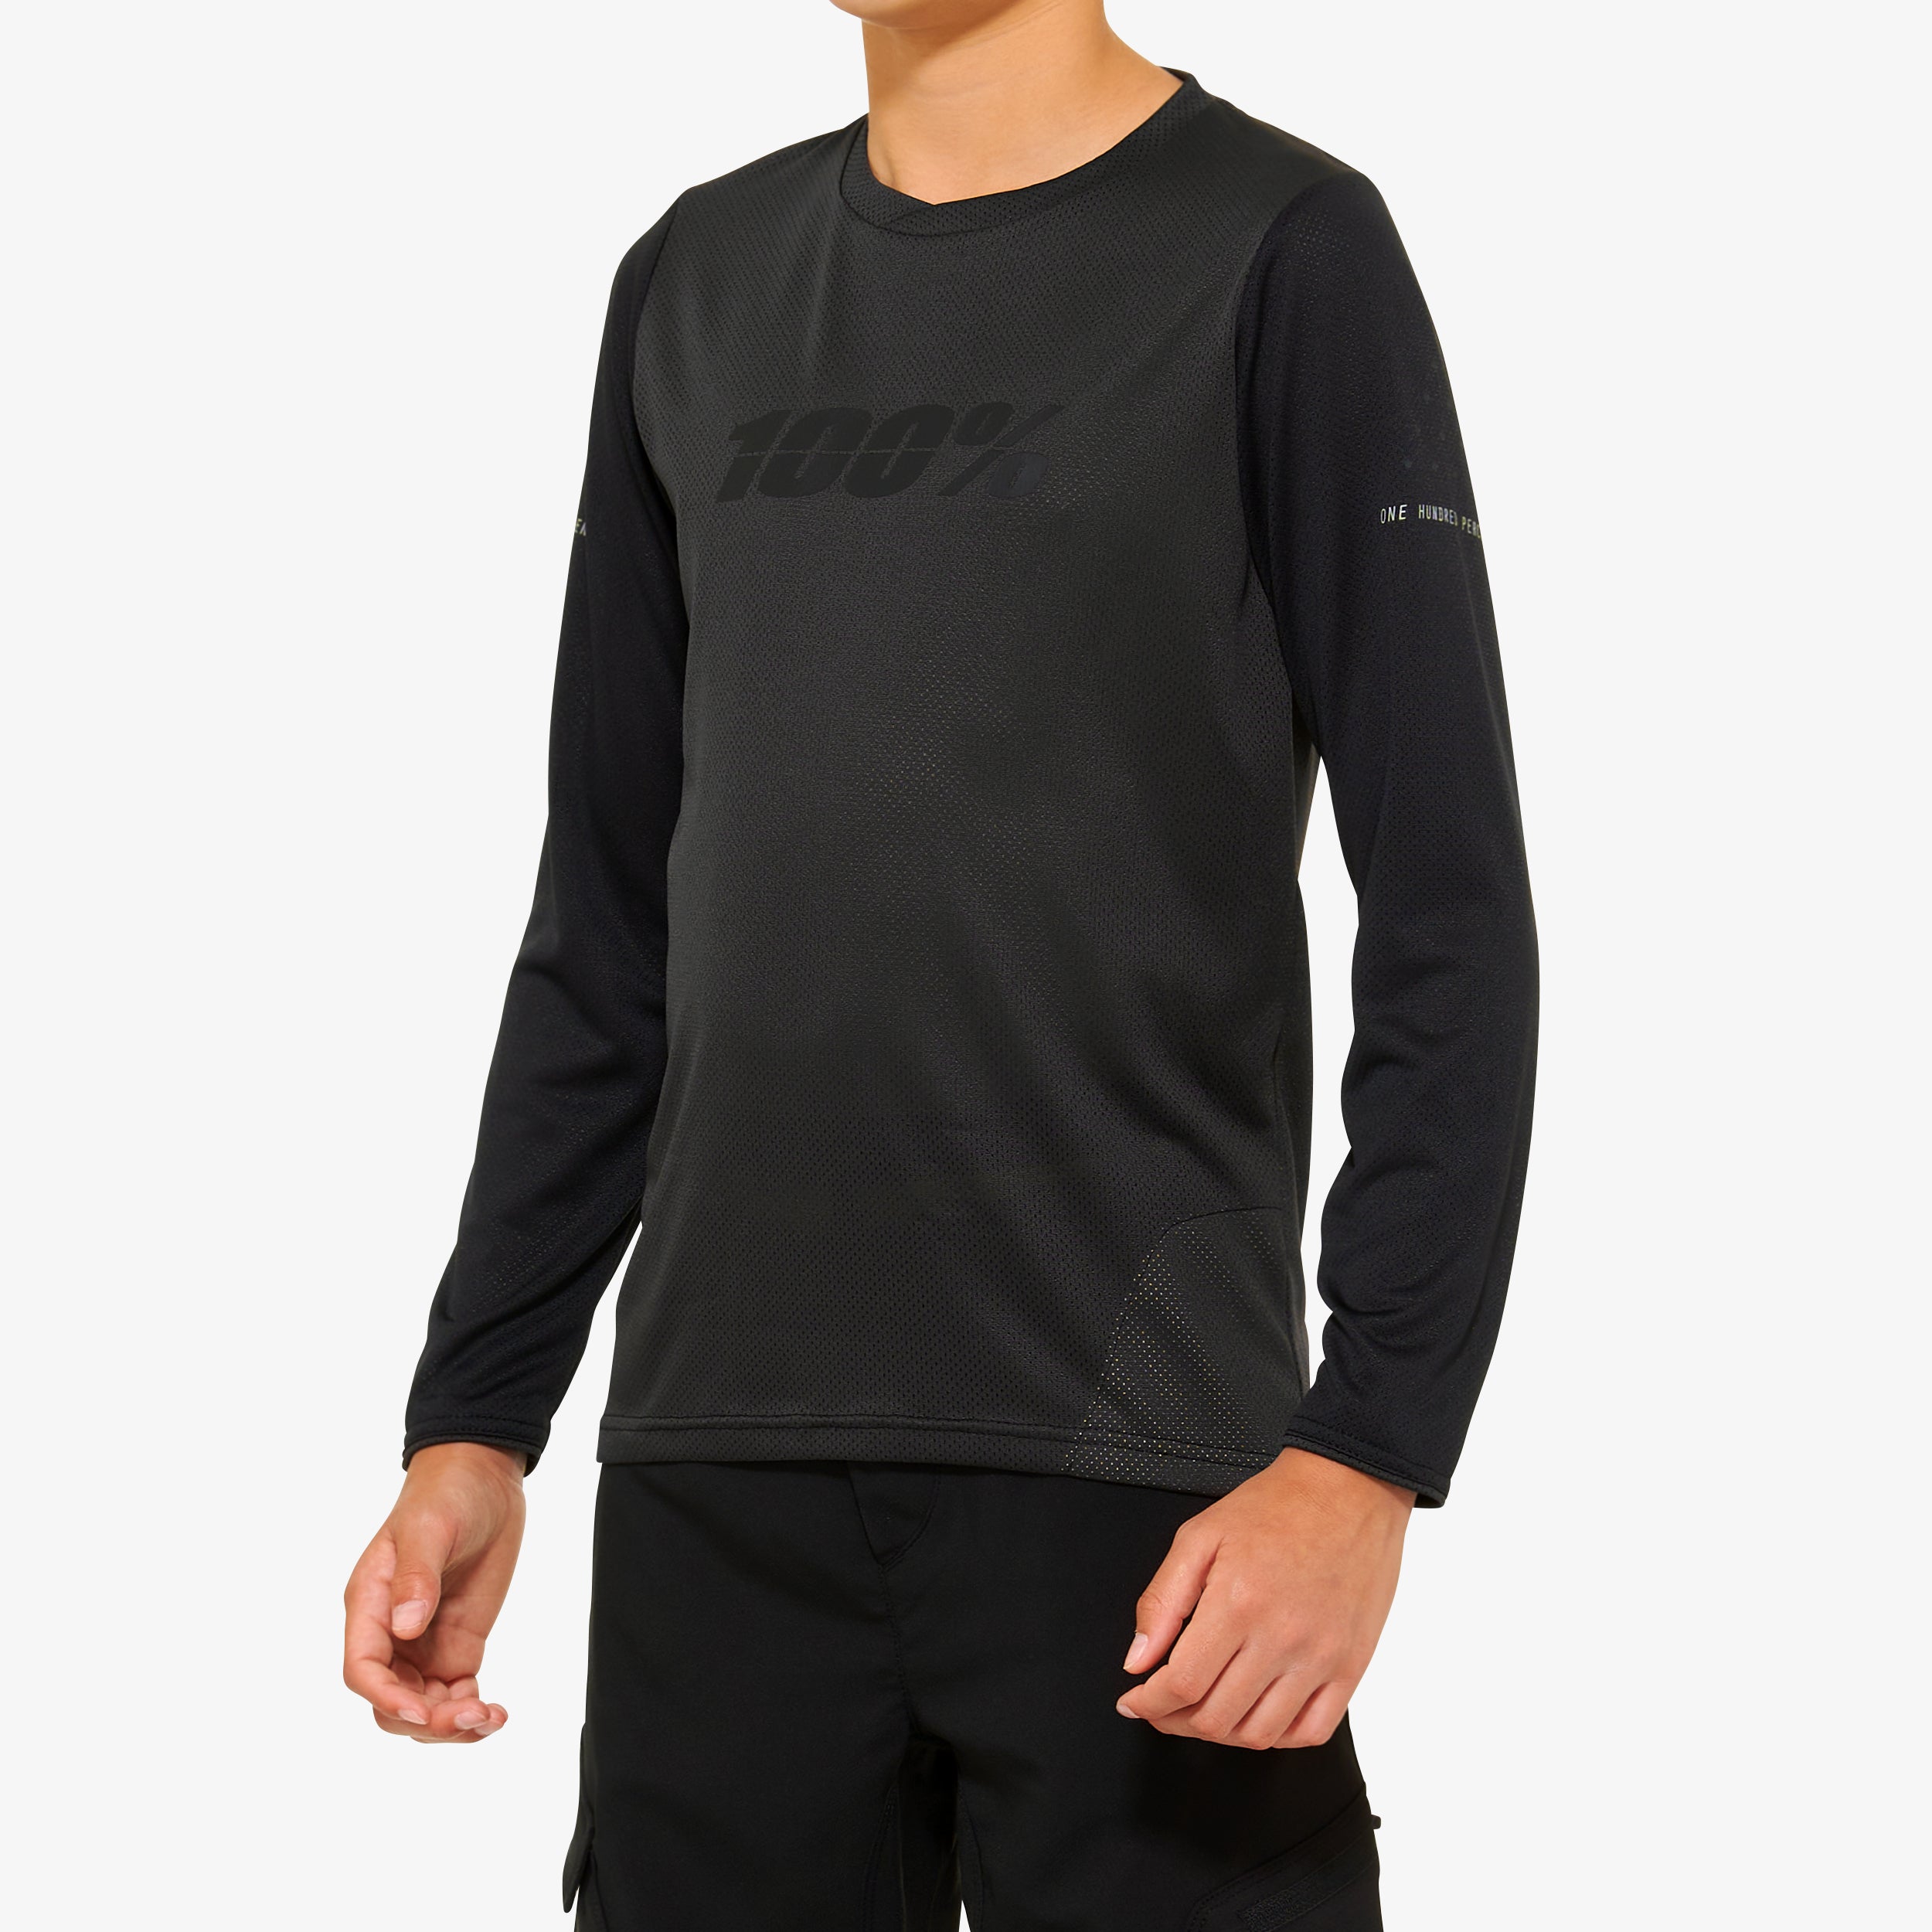 RIDECAMP Youth Long Sleeve Jersey Black/Charcoal